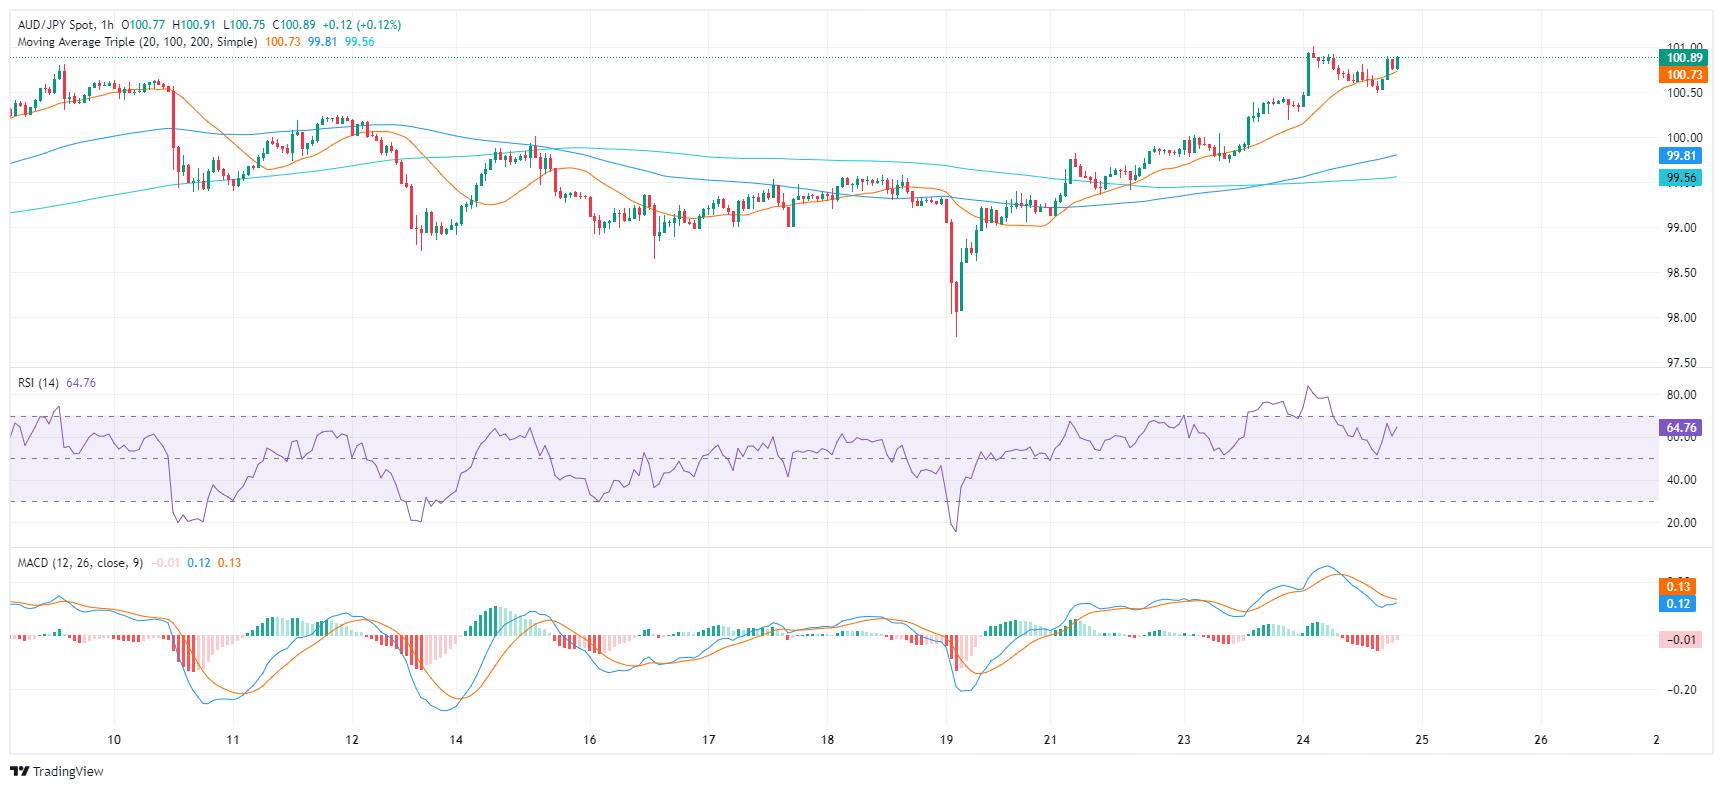 AUD/JPY Price Analysis: Bulls steer the market towards 101.00, its highest since 2014